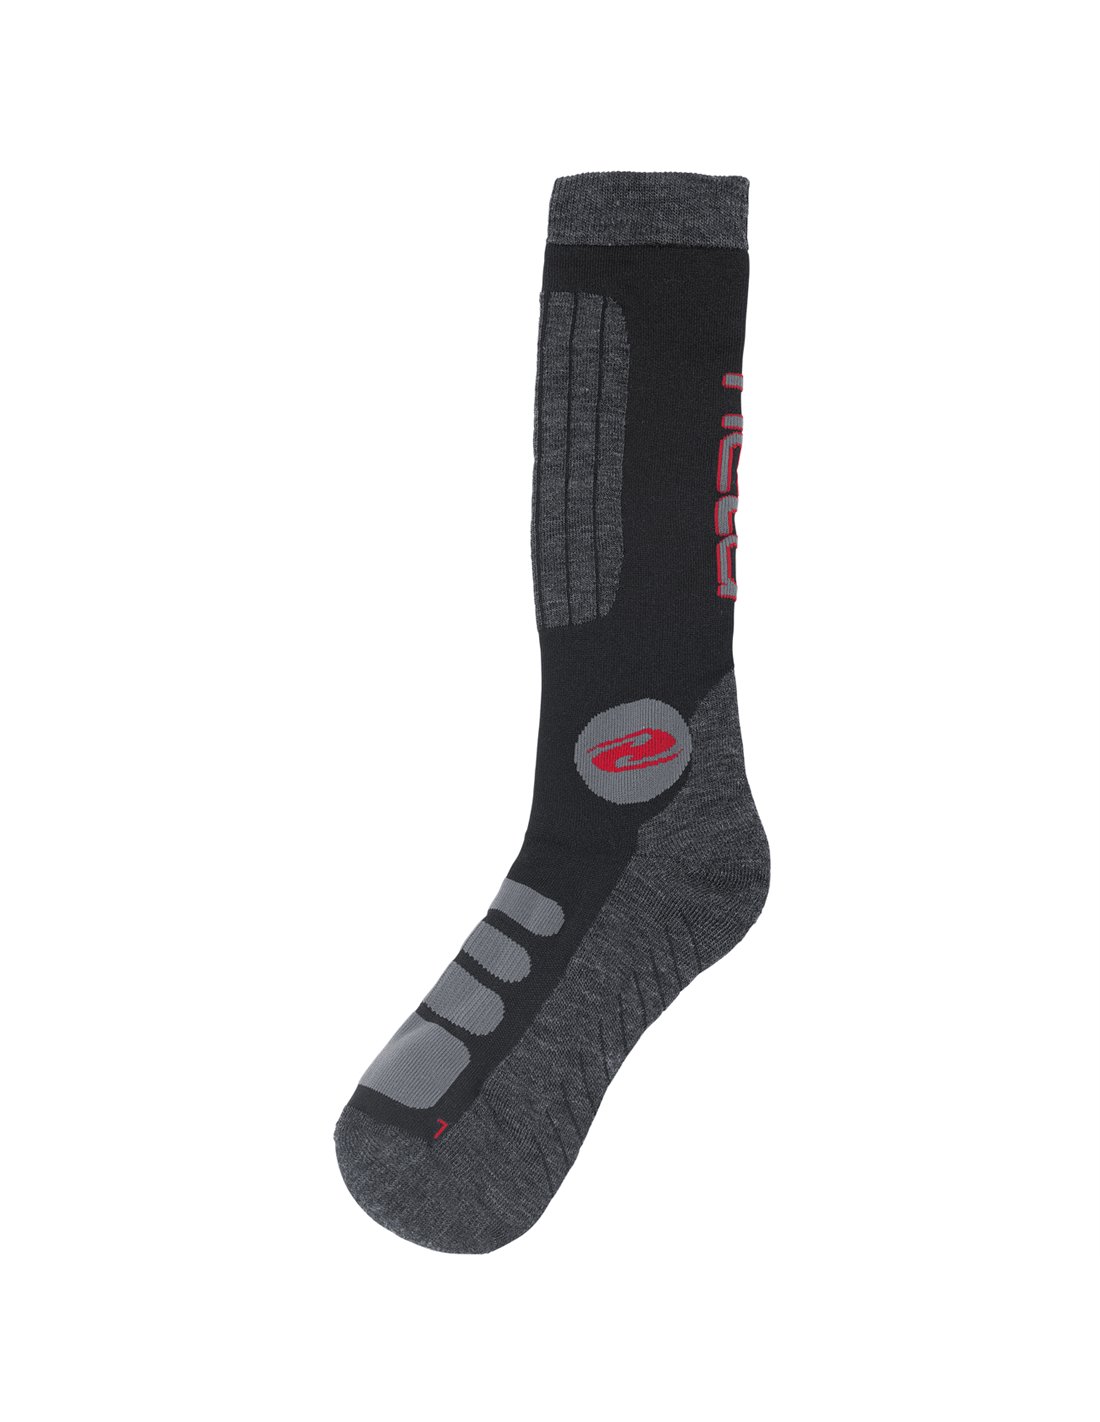 Calcetines Térmicos Shock Thermo